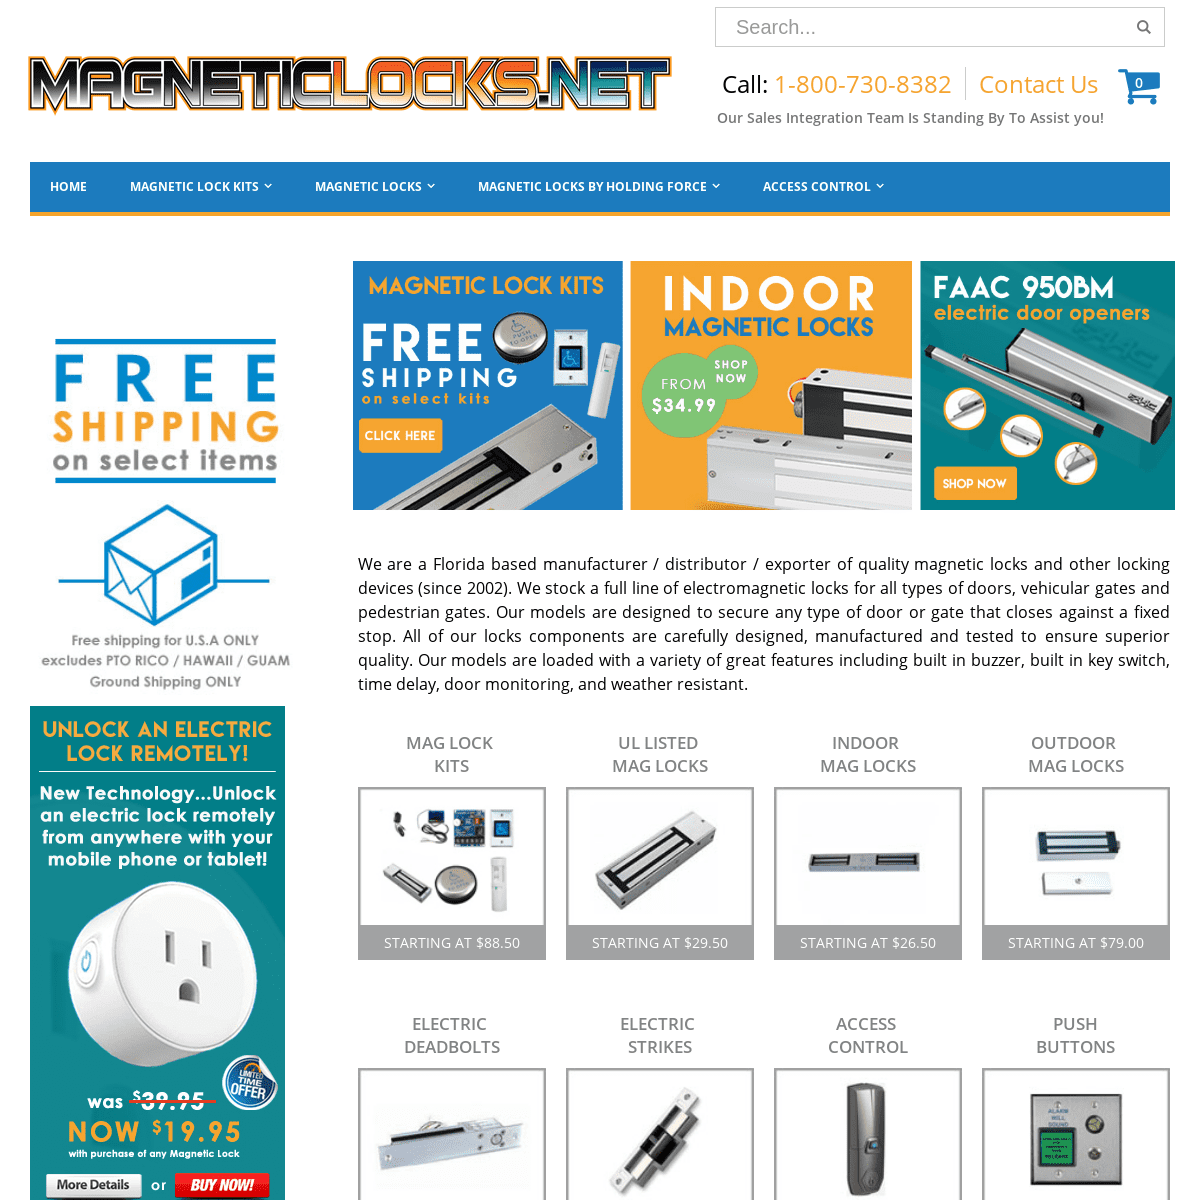 MAGNETICLOCKS.NET:: Your #1 Source for Magnetic Locks, Electromagnetic Locks, Gate Locks and More!